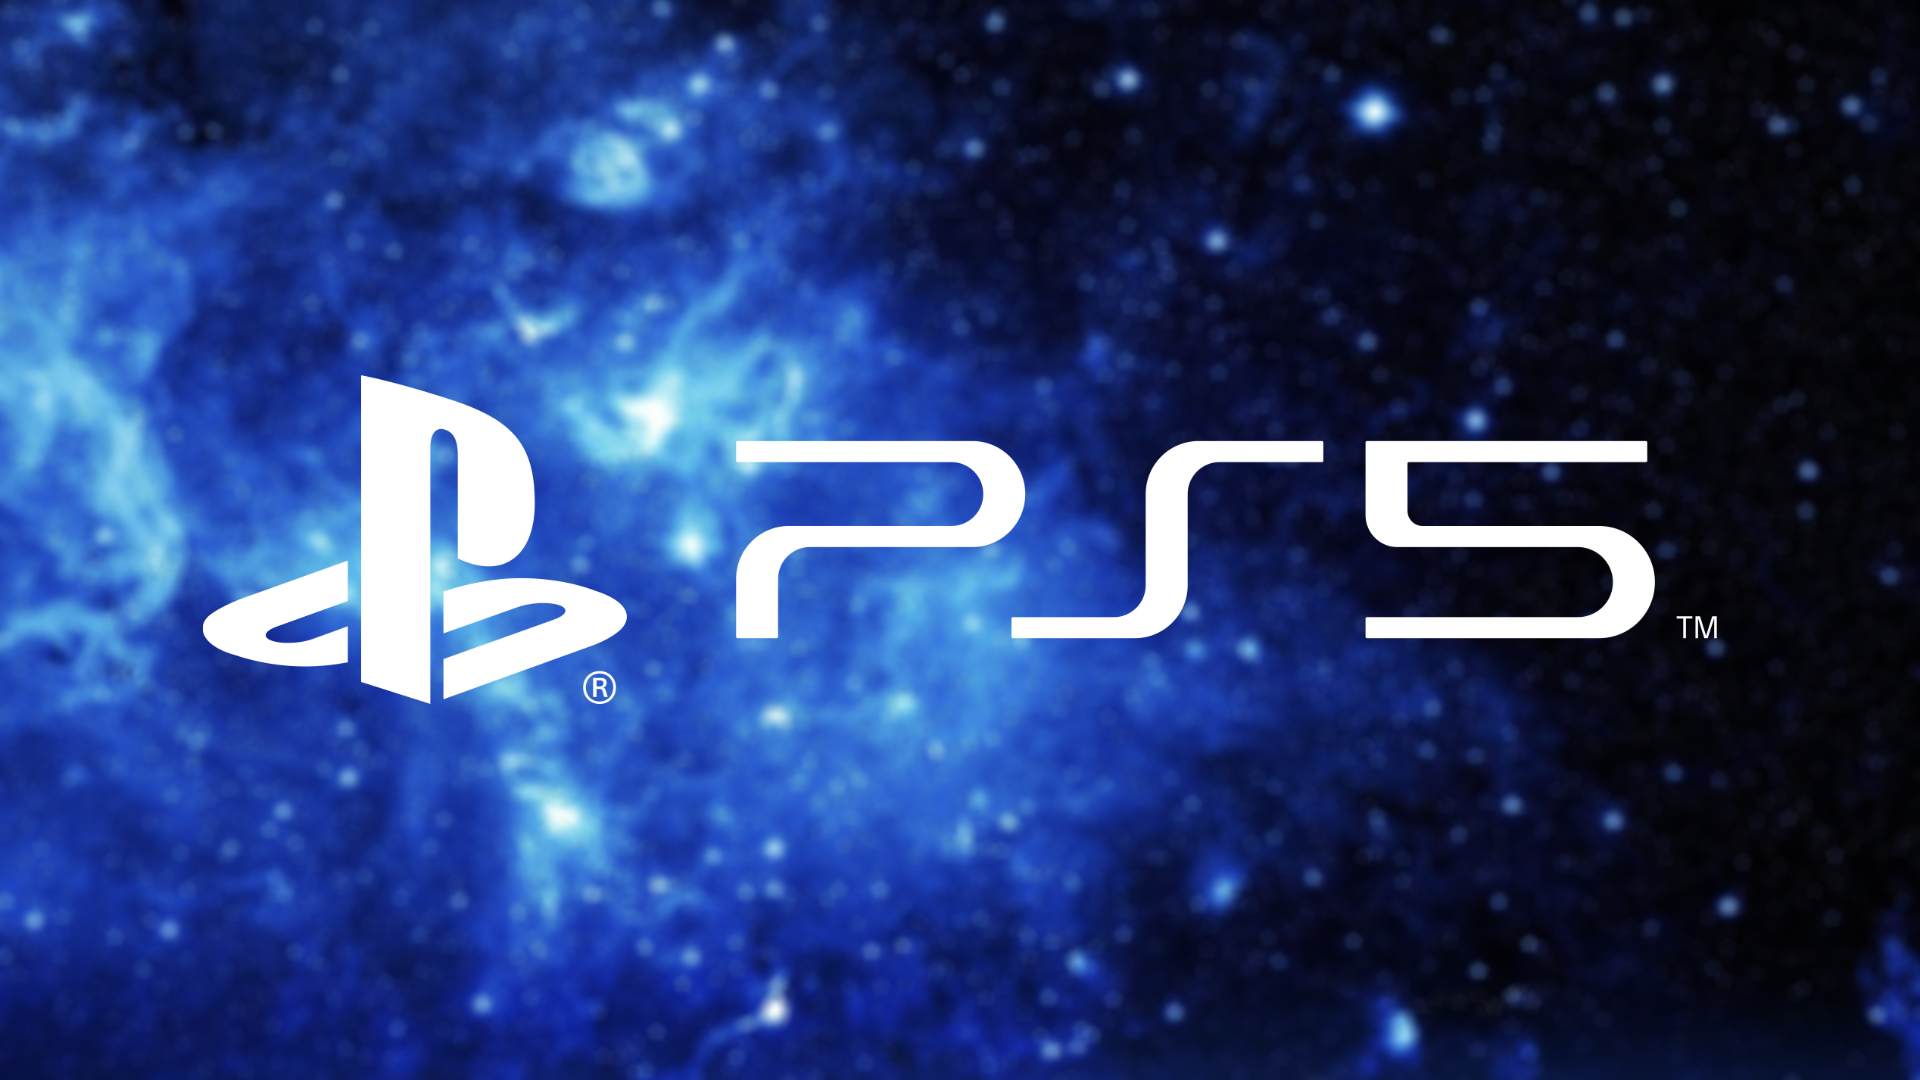 PlayStation 'State of Play' presentation taking place today